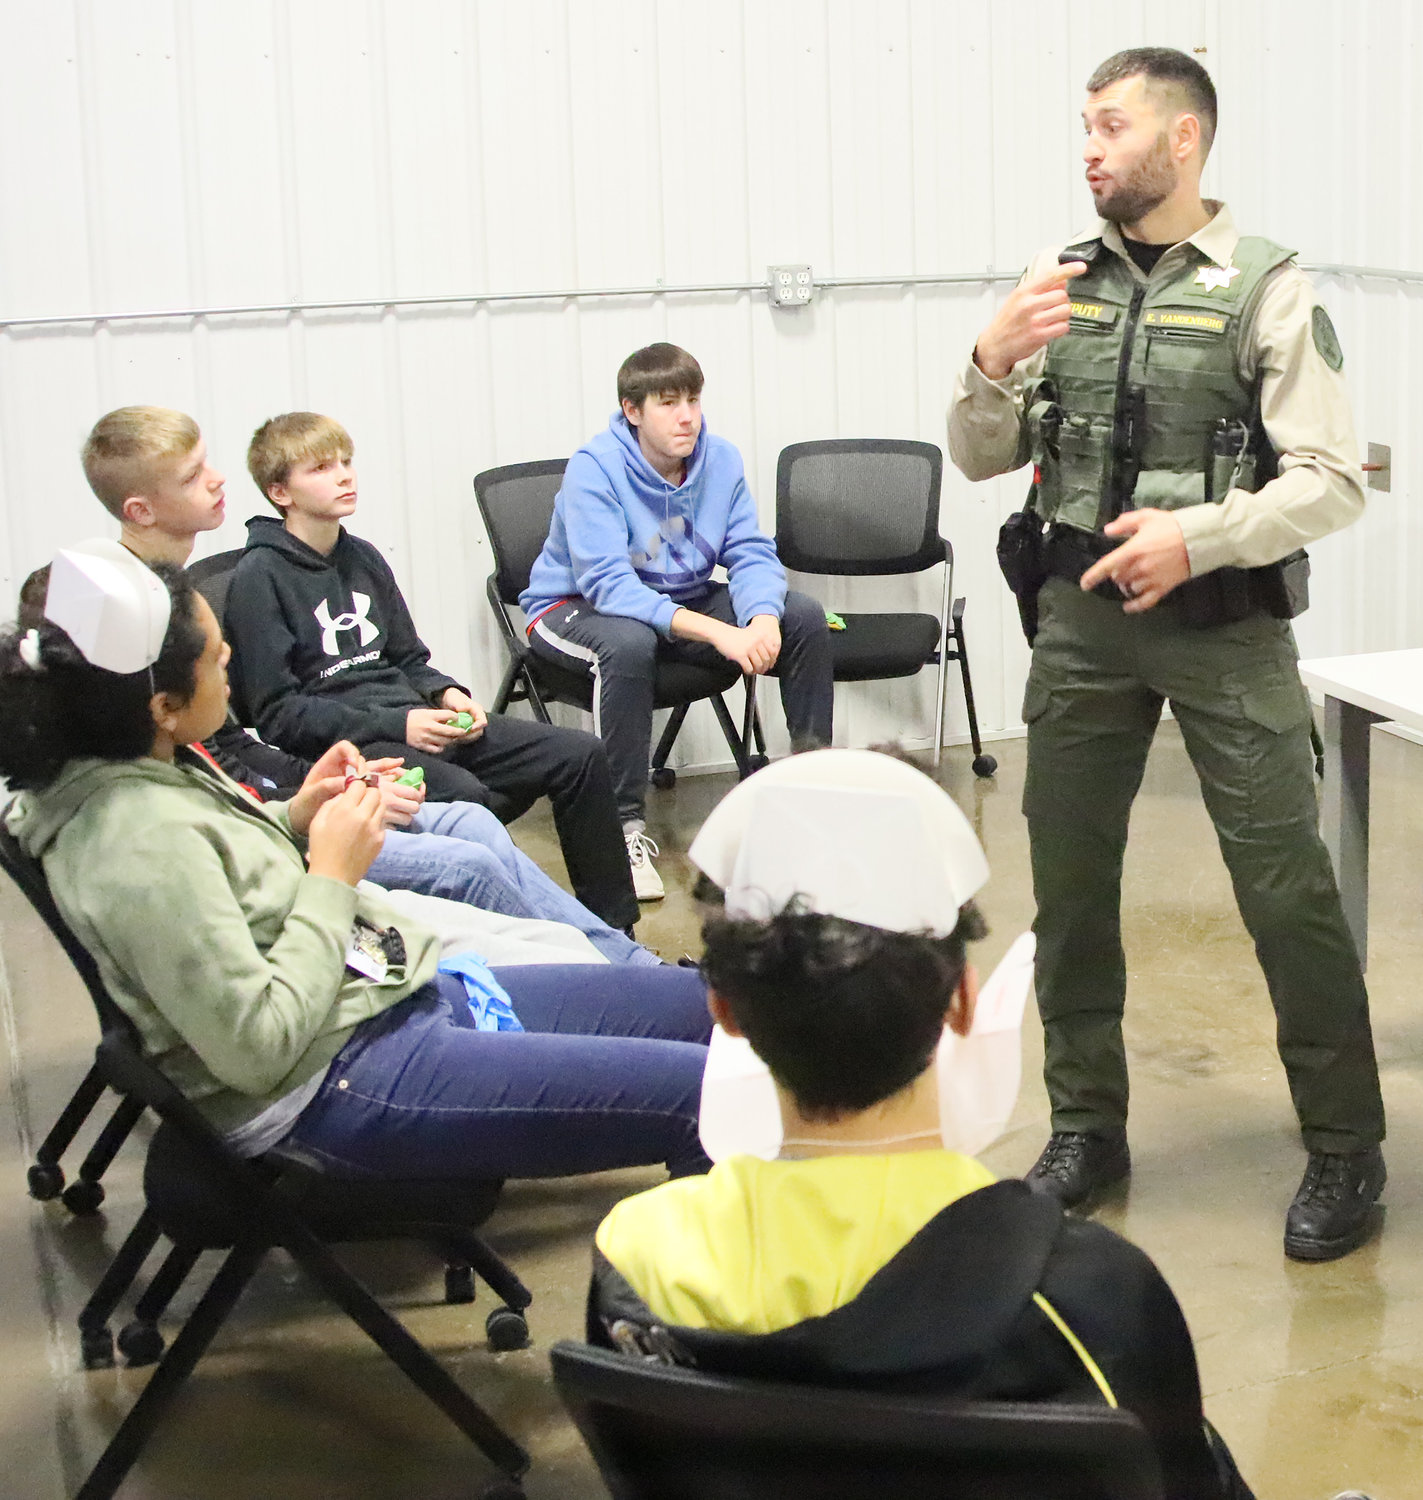 Lee County Sheriff's Deputy Elliott Vandenberg talks with students about the day-to-day operations of the sheriff's department.